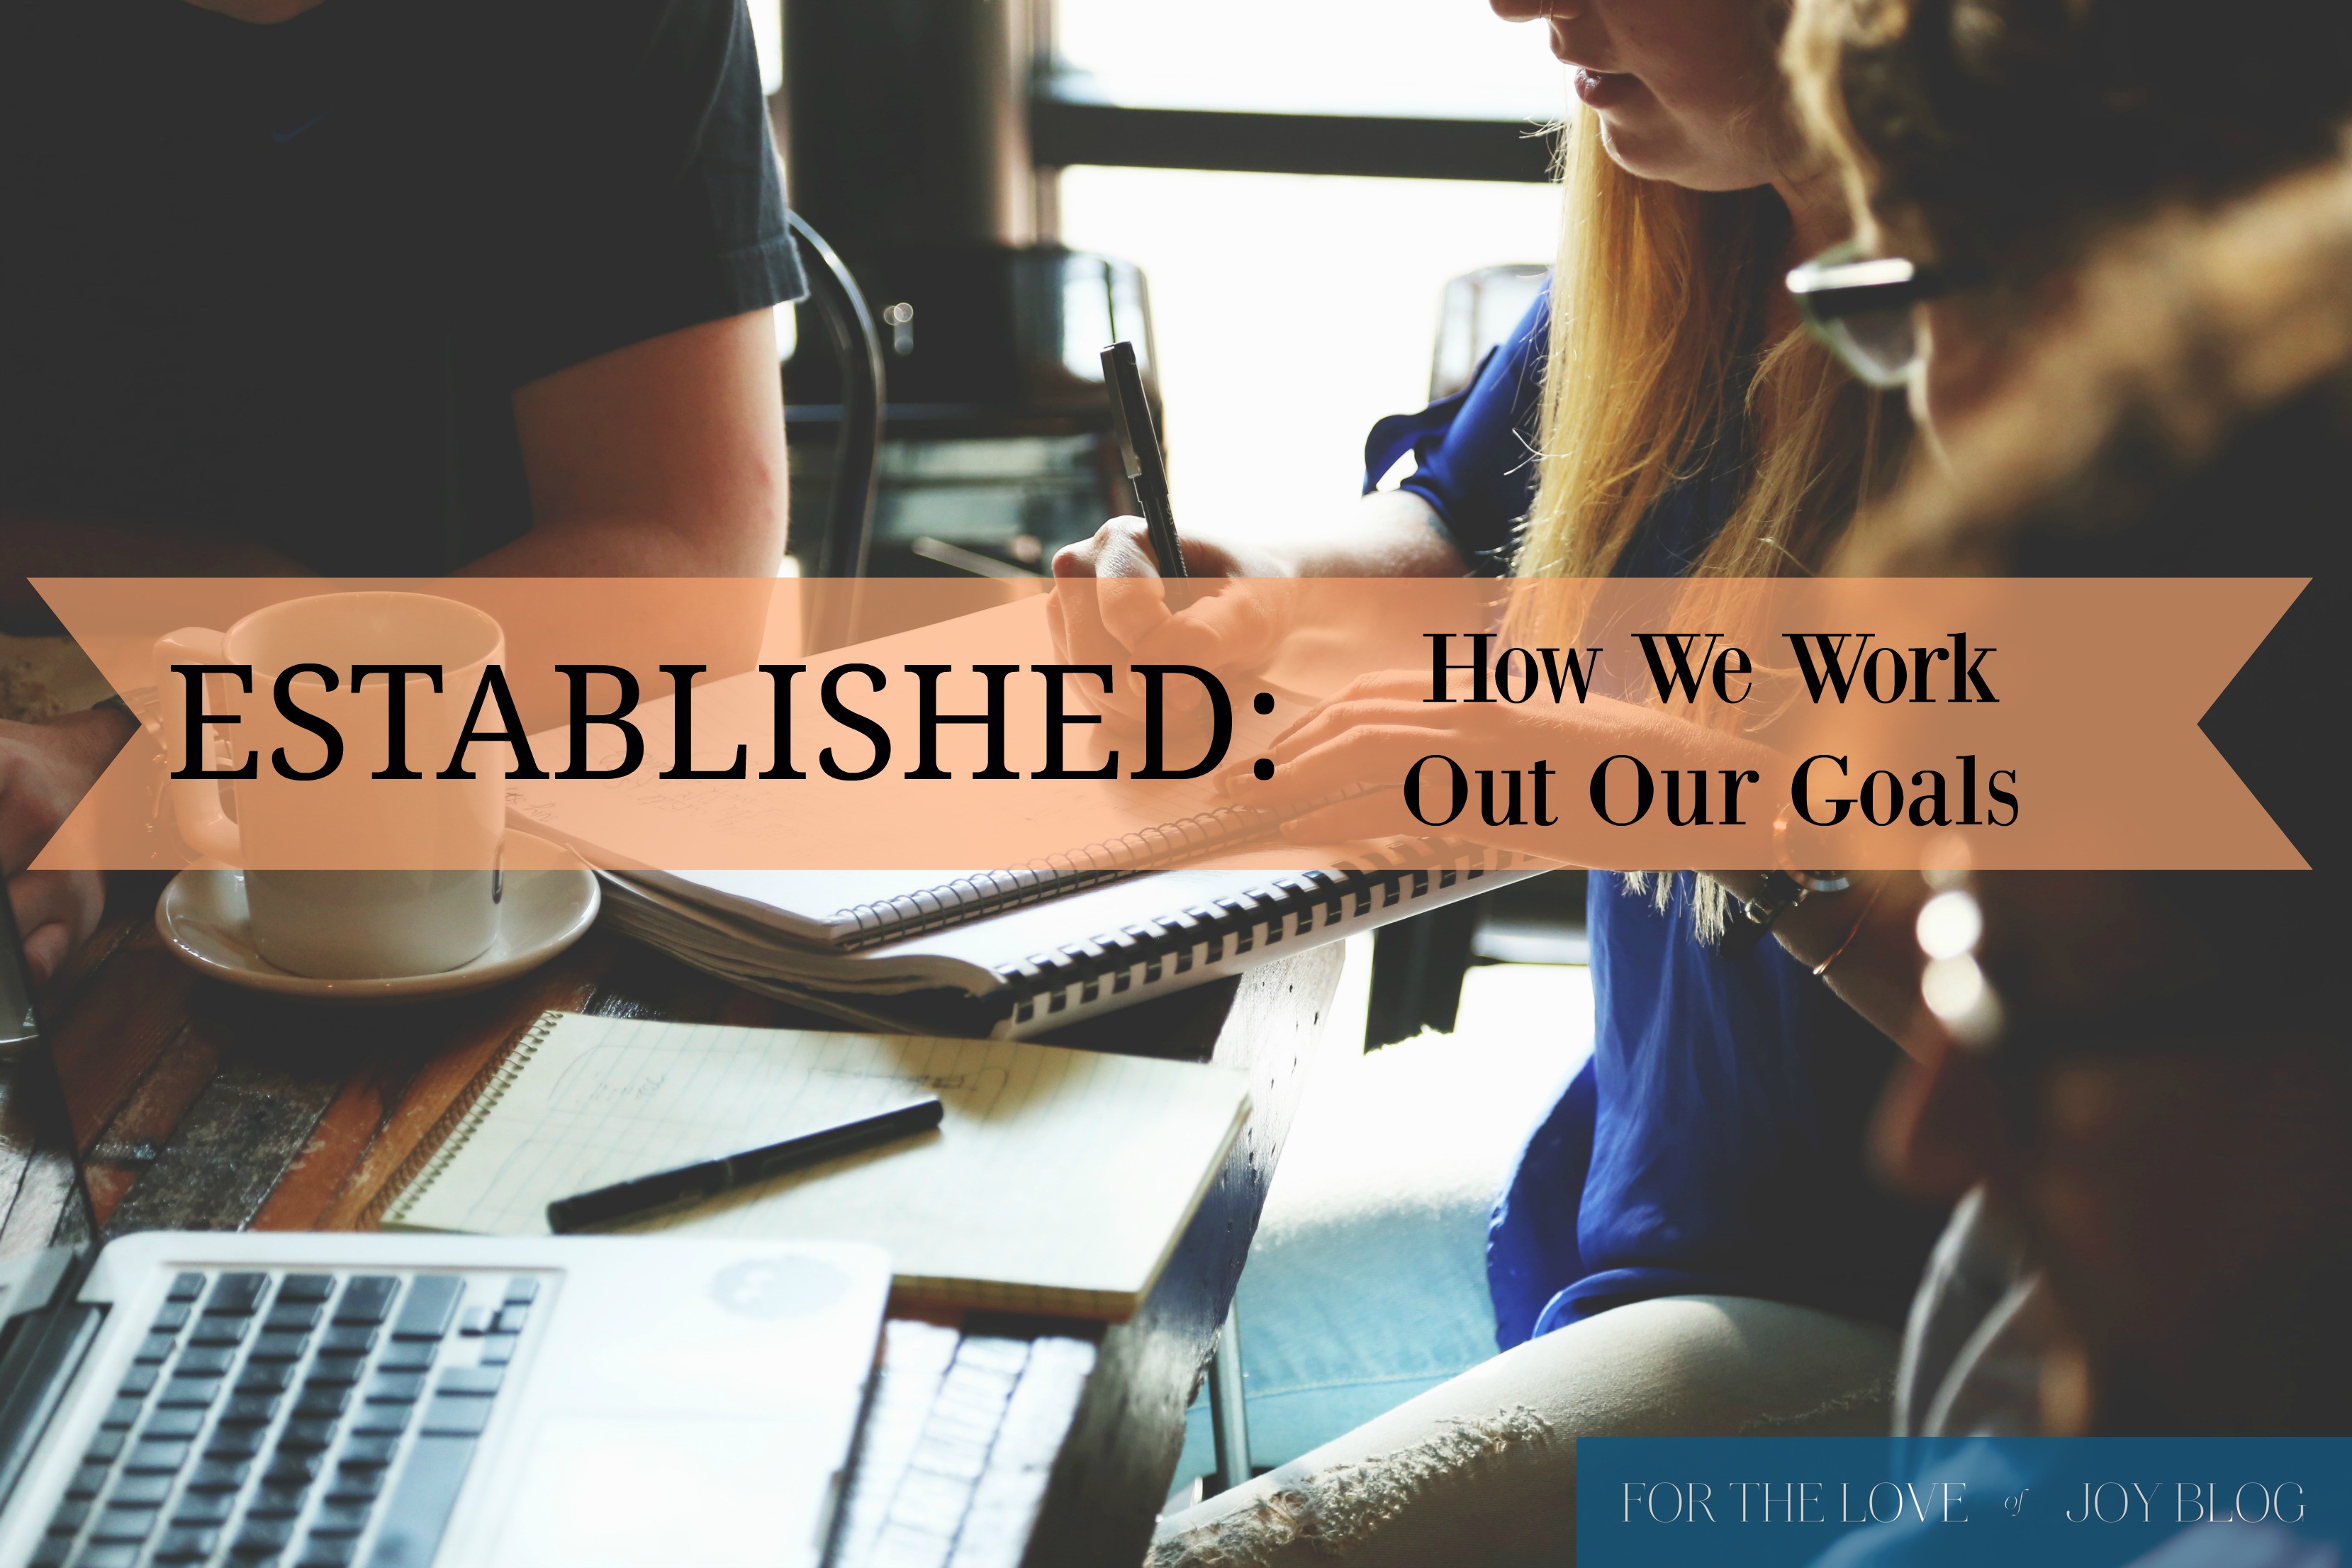 Established: How We Attain Our Goals